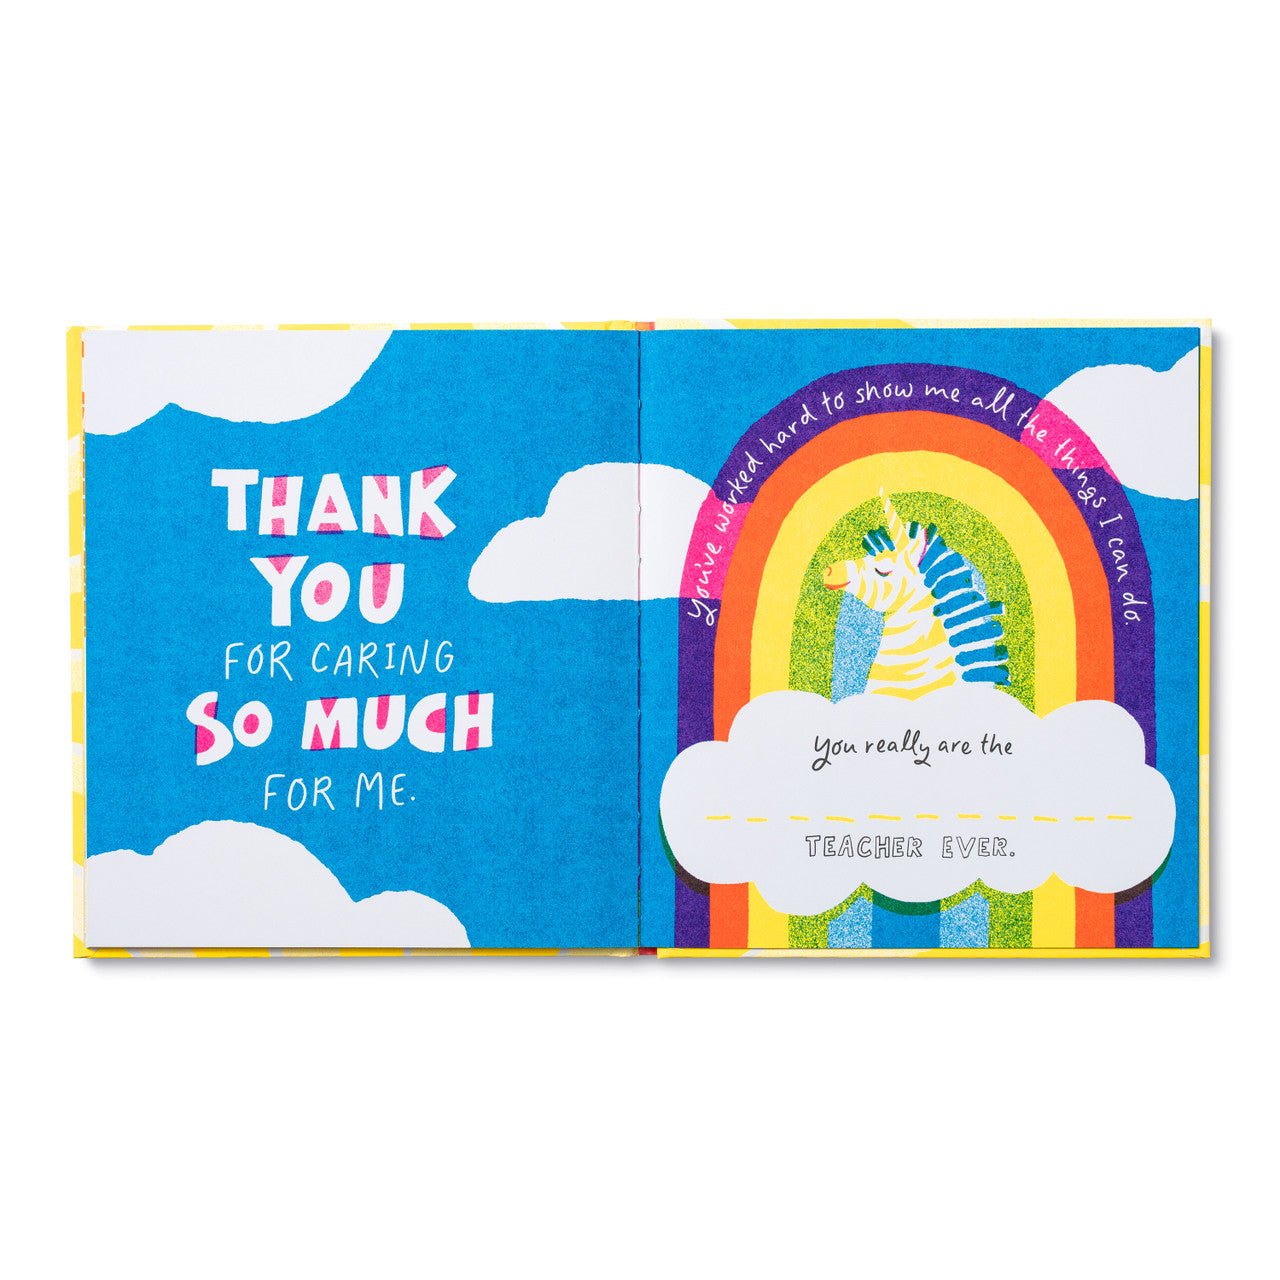 Teacher, I Made You a Book - Activity Gift Book - The Kindness Cause